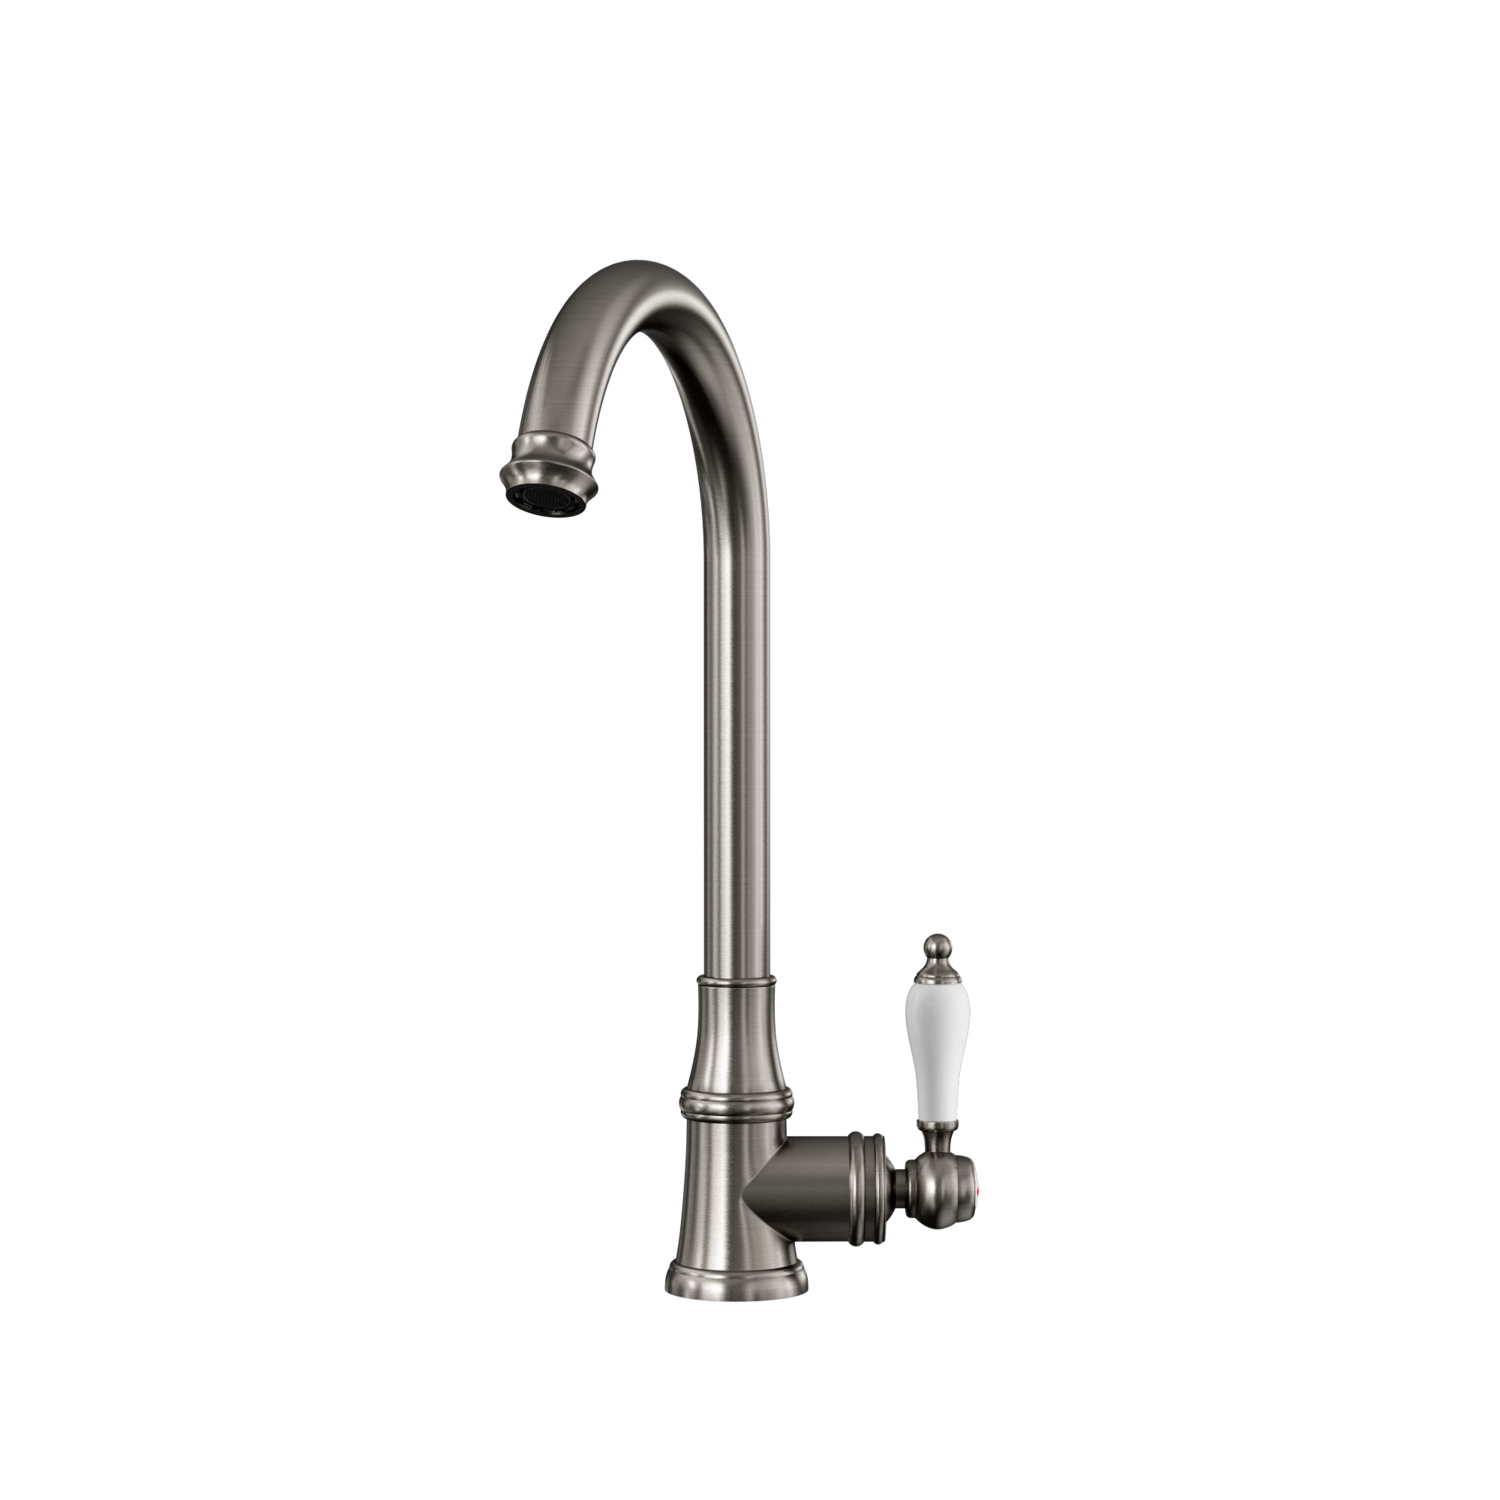 Taylor & Moore Hastings Traditional Kitchen Mixer Tap with Swivel Spout & Single Lever - Brushed Nic